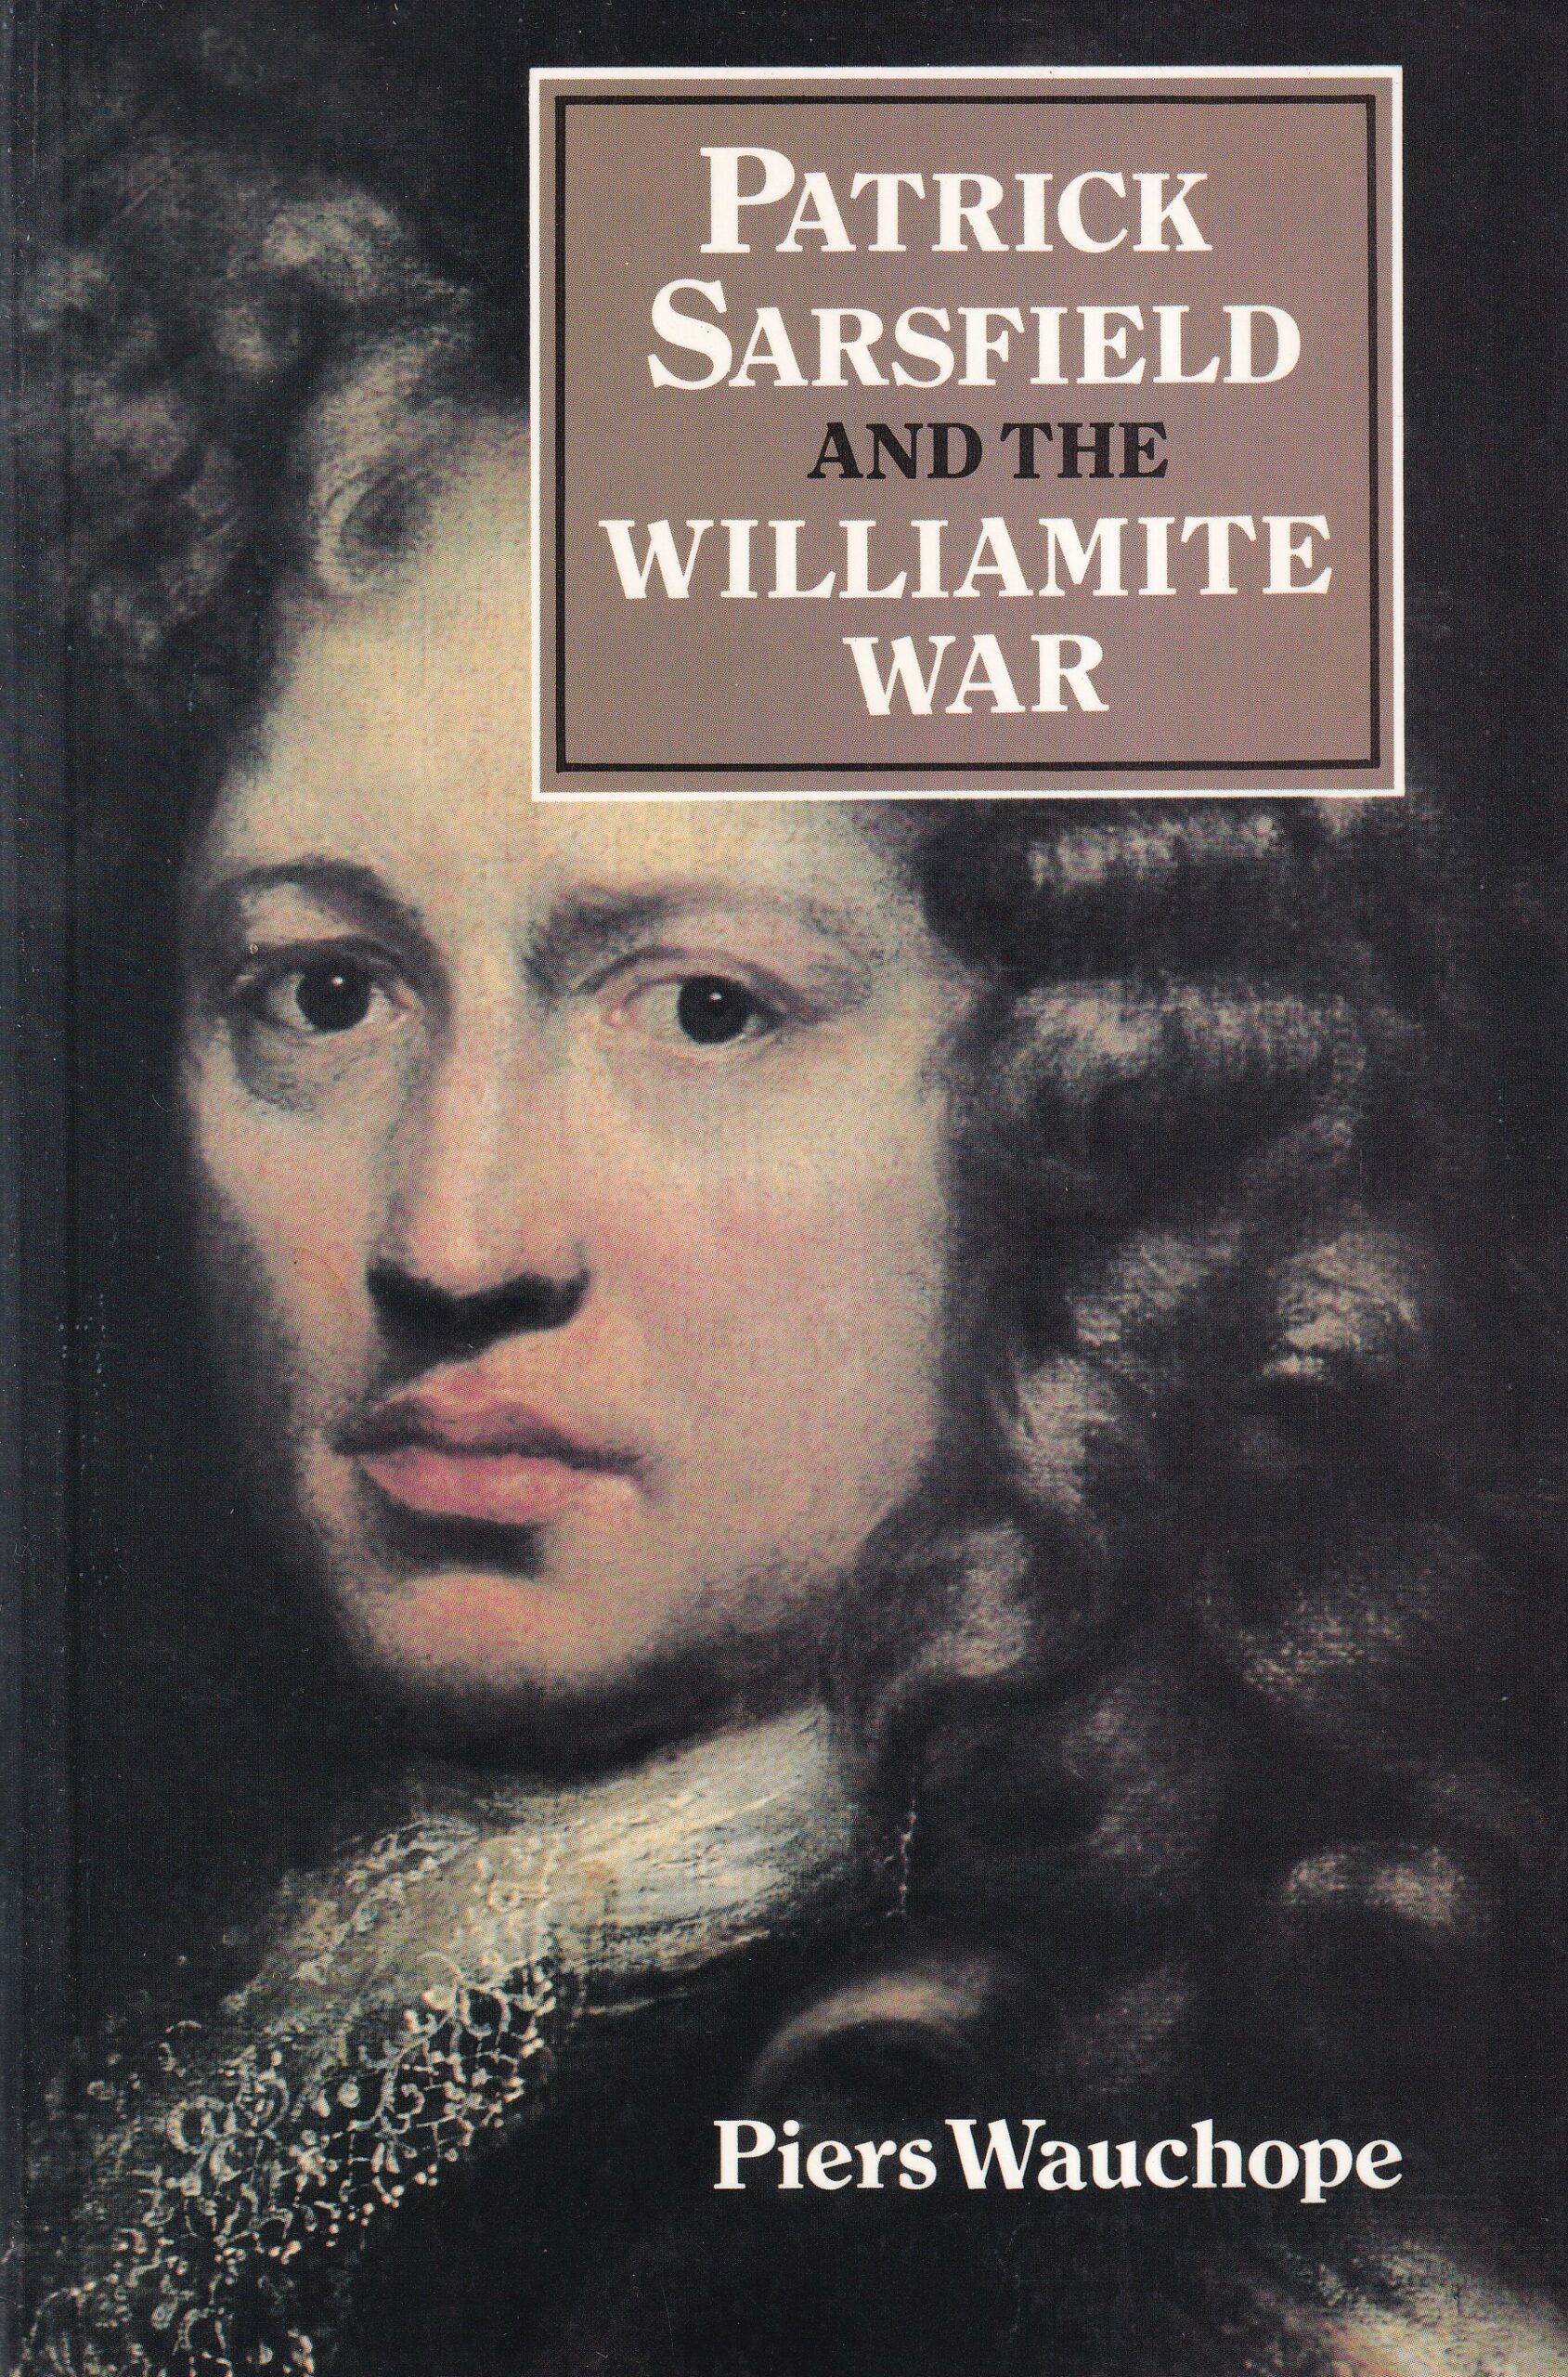 Patrick Sarsfield and the Williamite War | Piers Wauchope | Charlie Byrne's